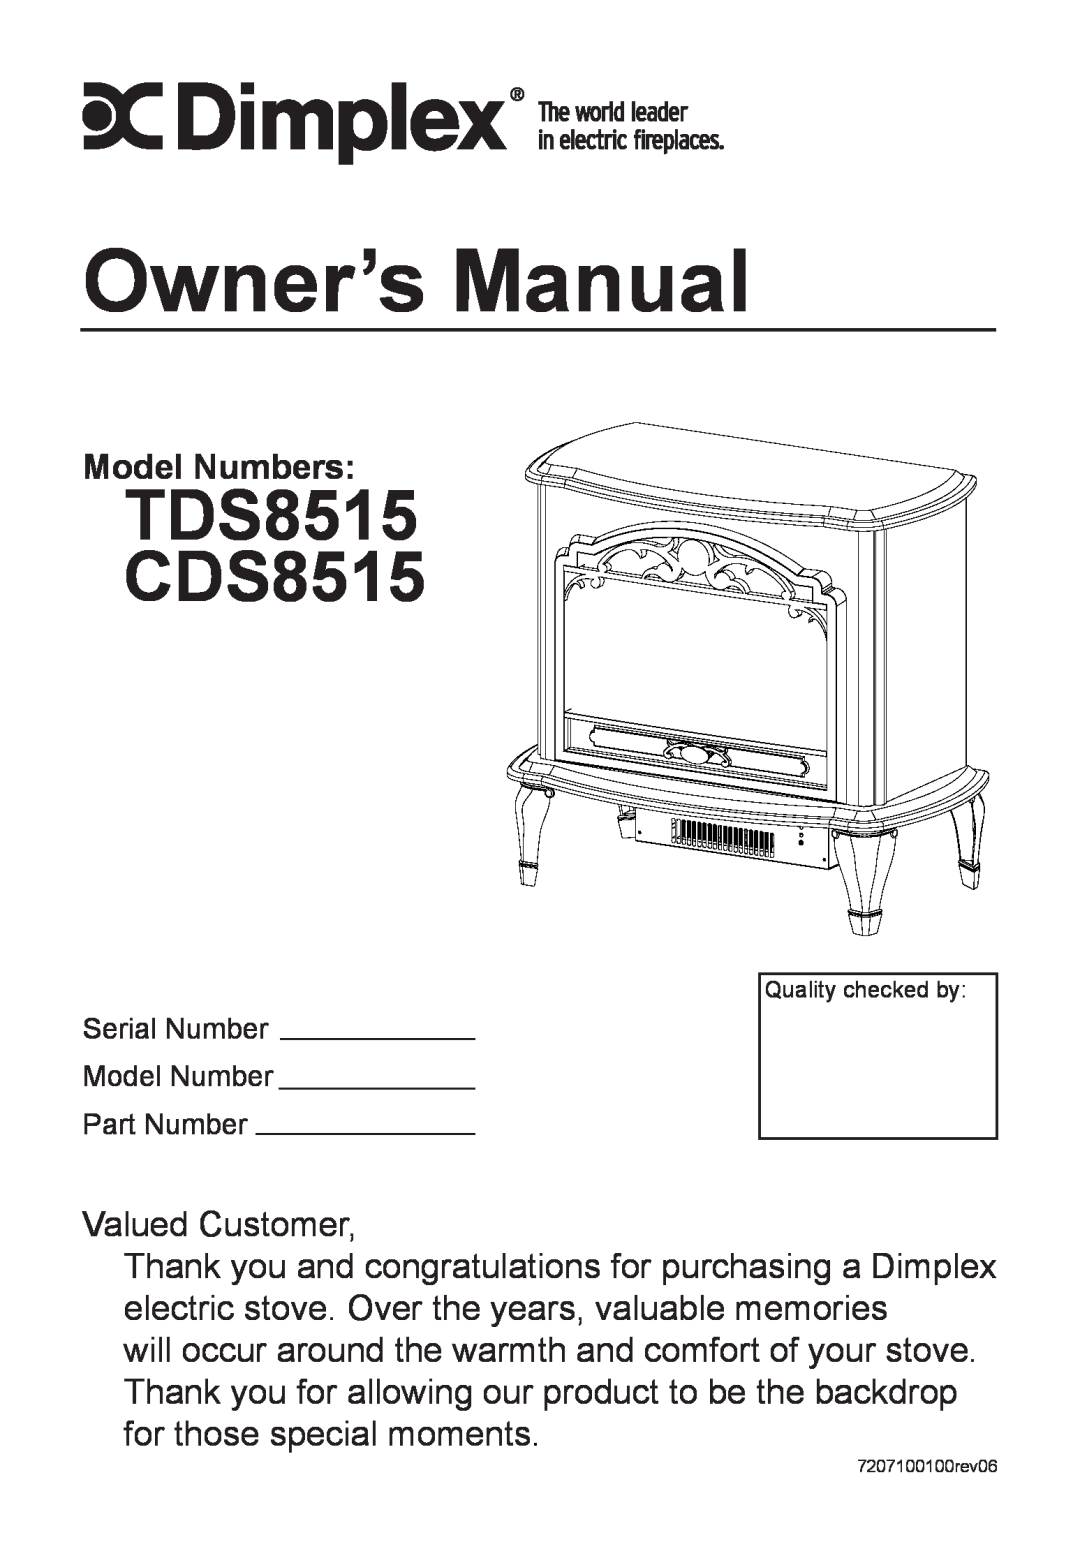 Dimplex owner manual TDS8515 CDS8515, Model Numbers 